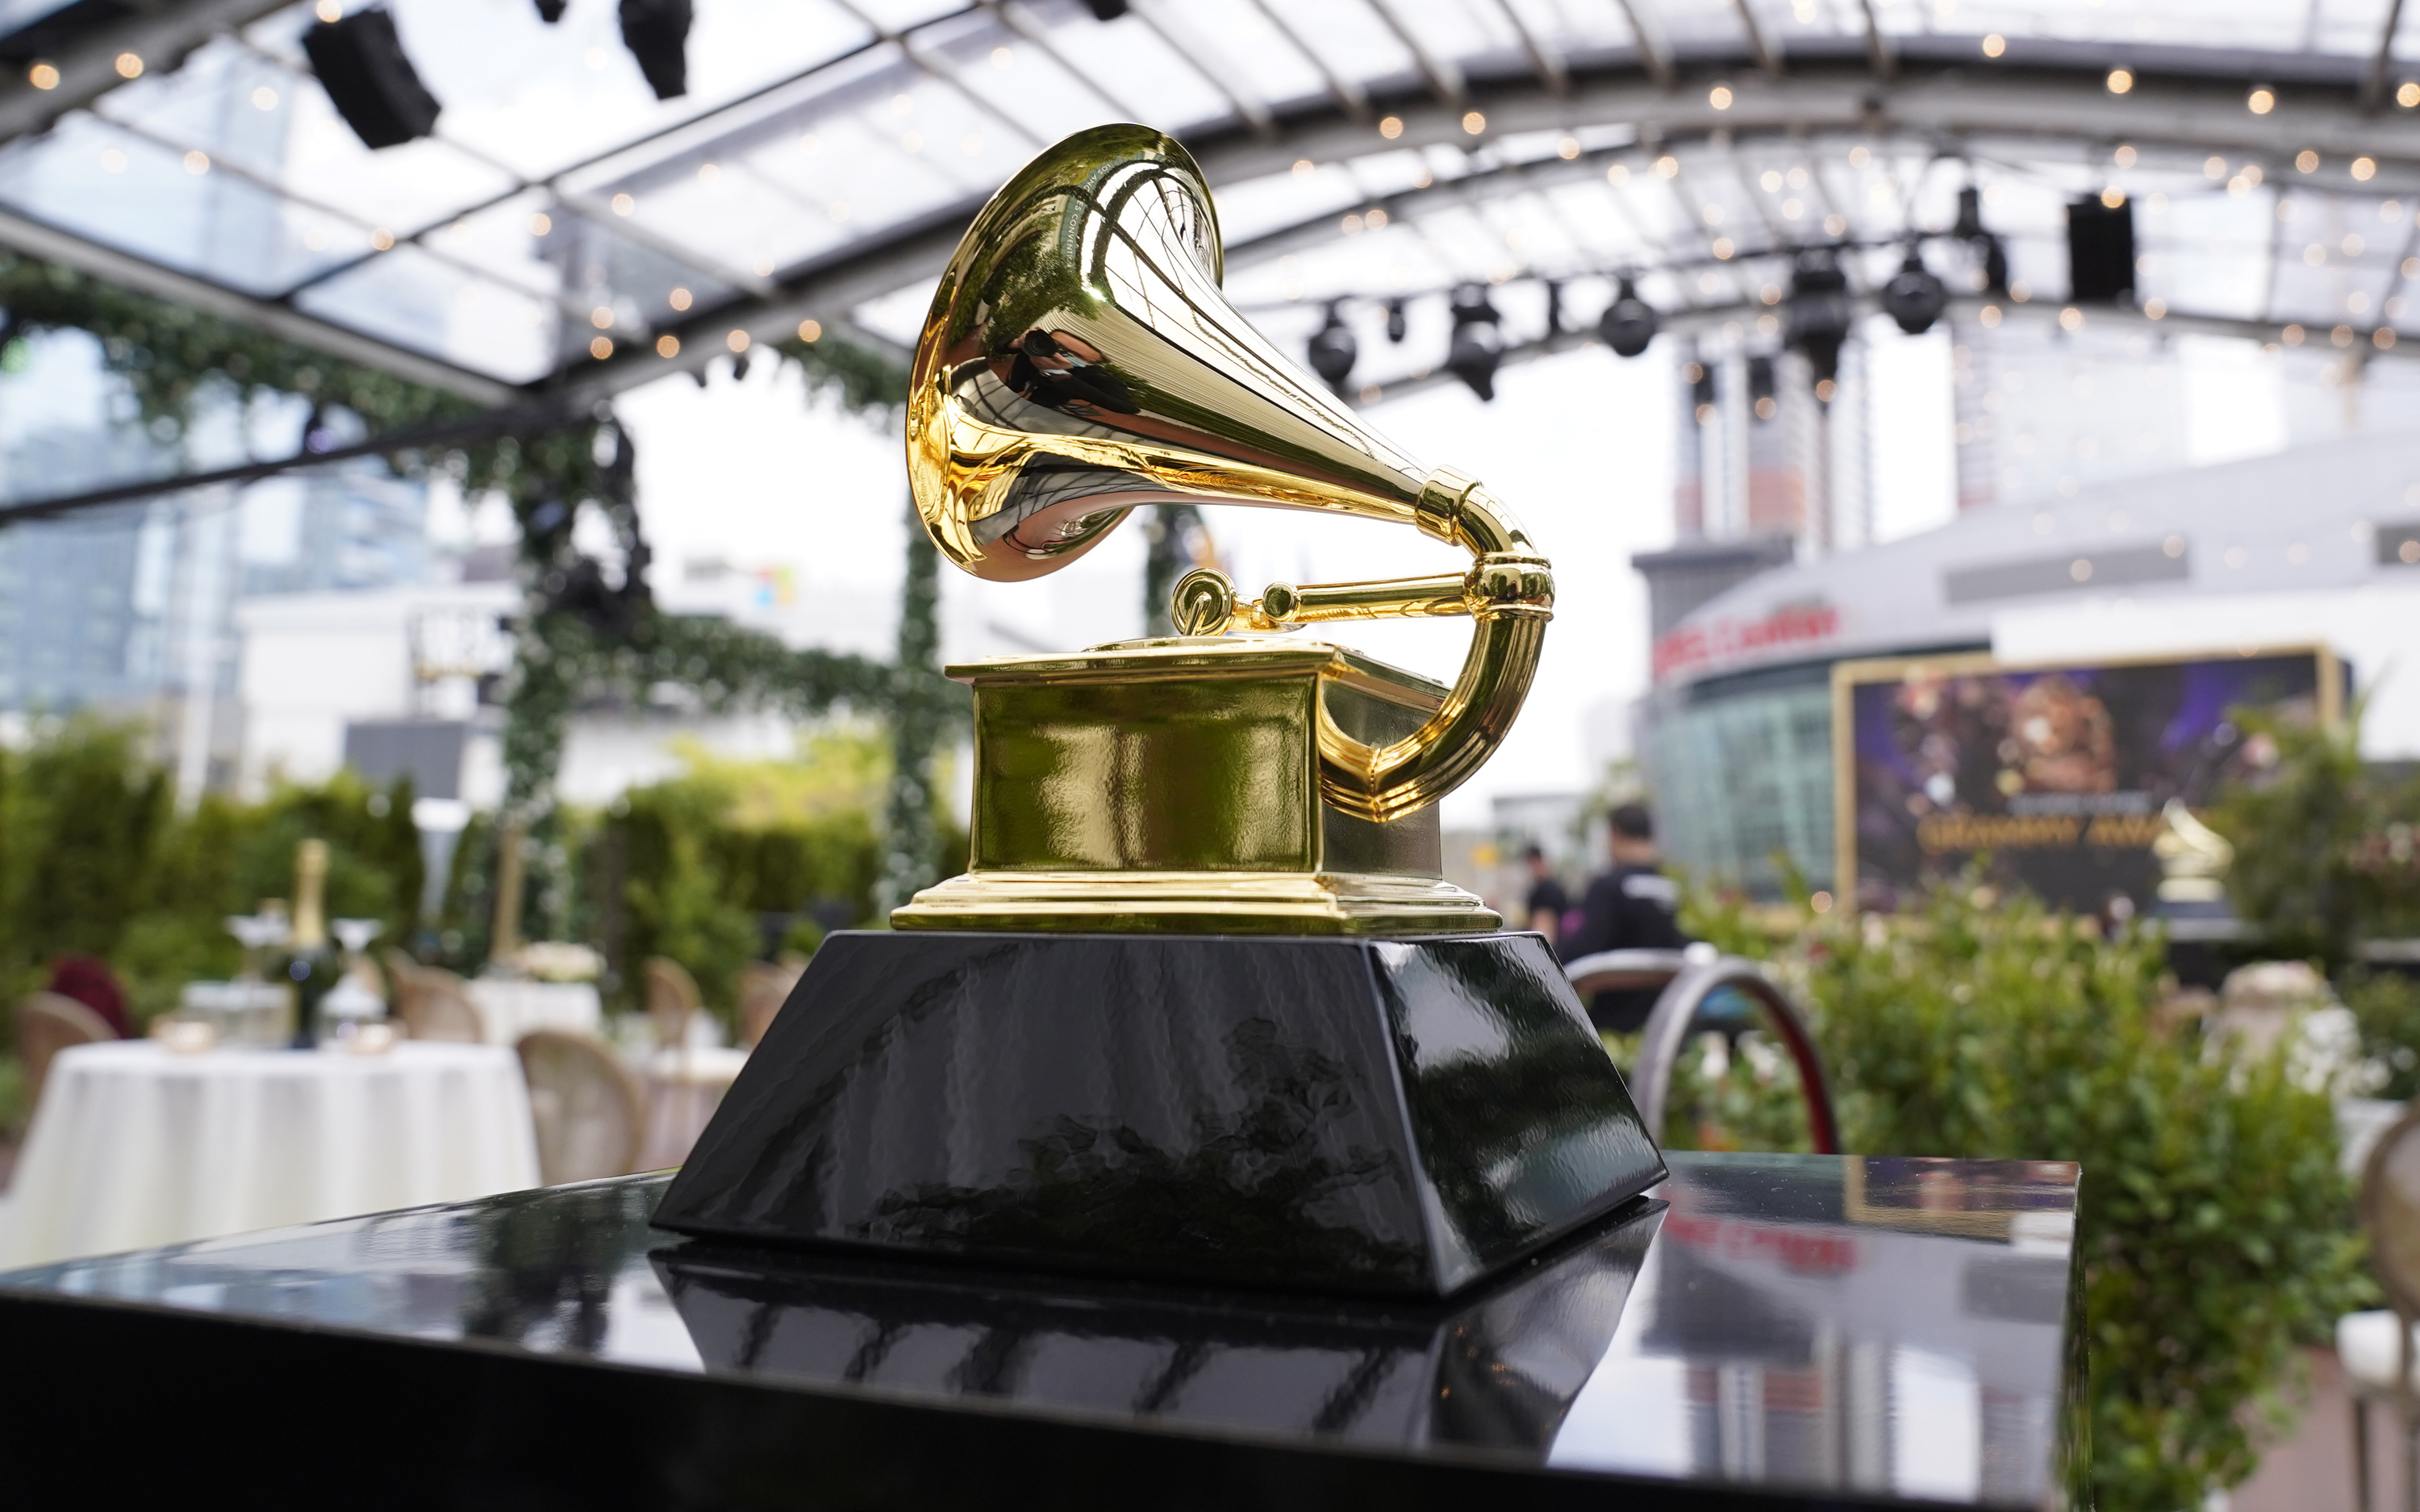 A decorative grammy is seen before the start of the 63rd annual Grammy Awards at the Los Angeles Convention Center on Sunday, March 14, 2021.